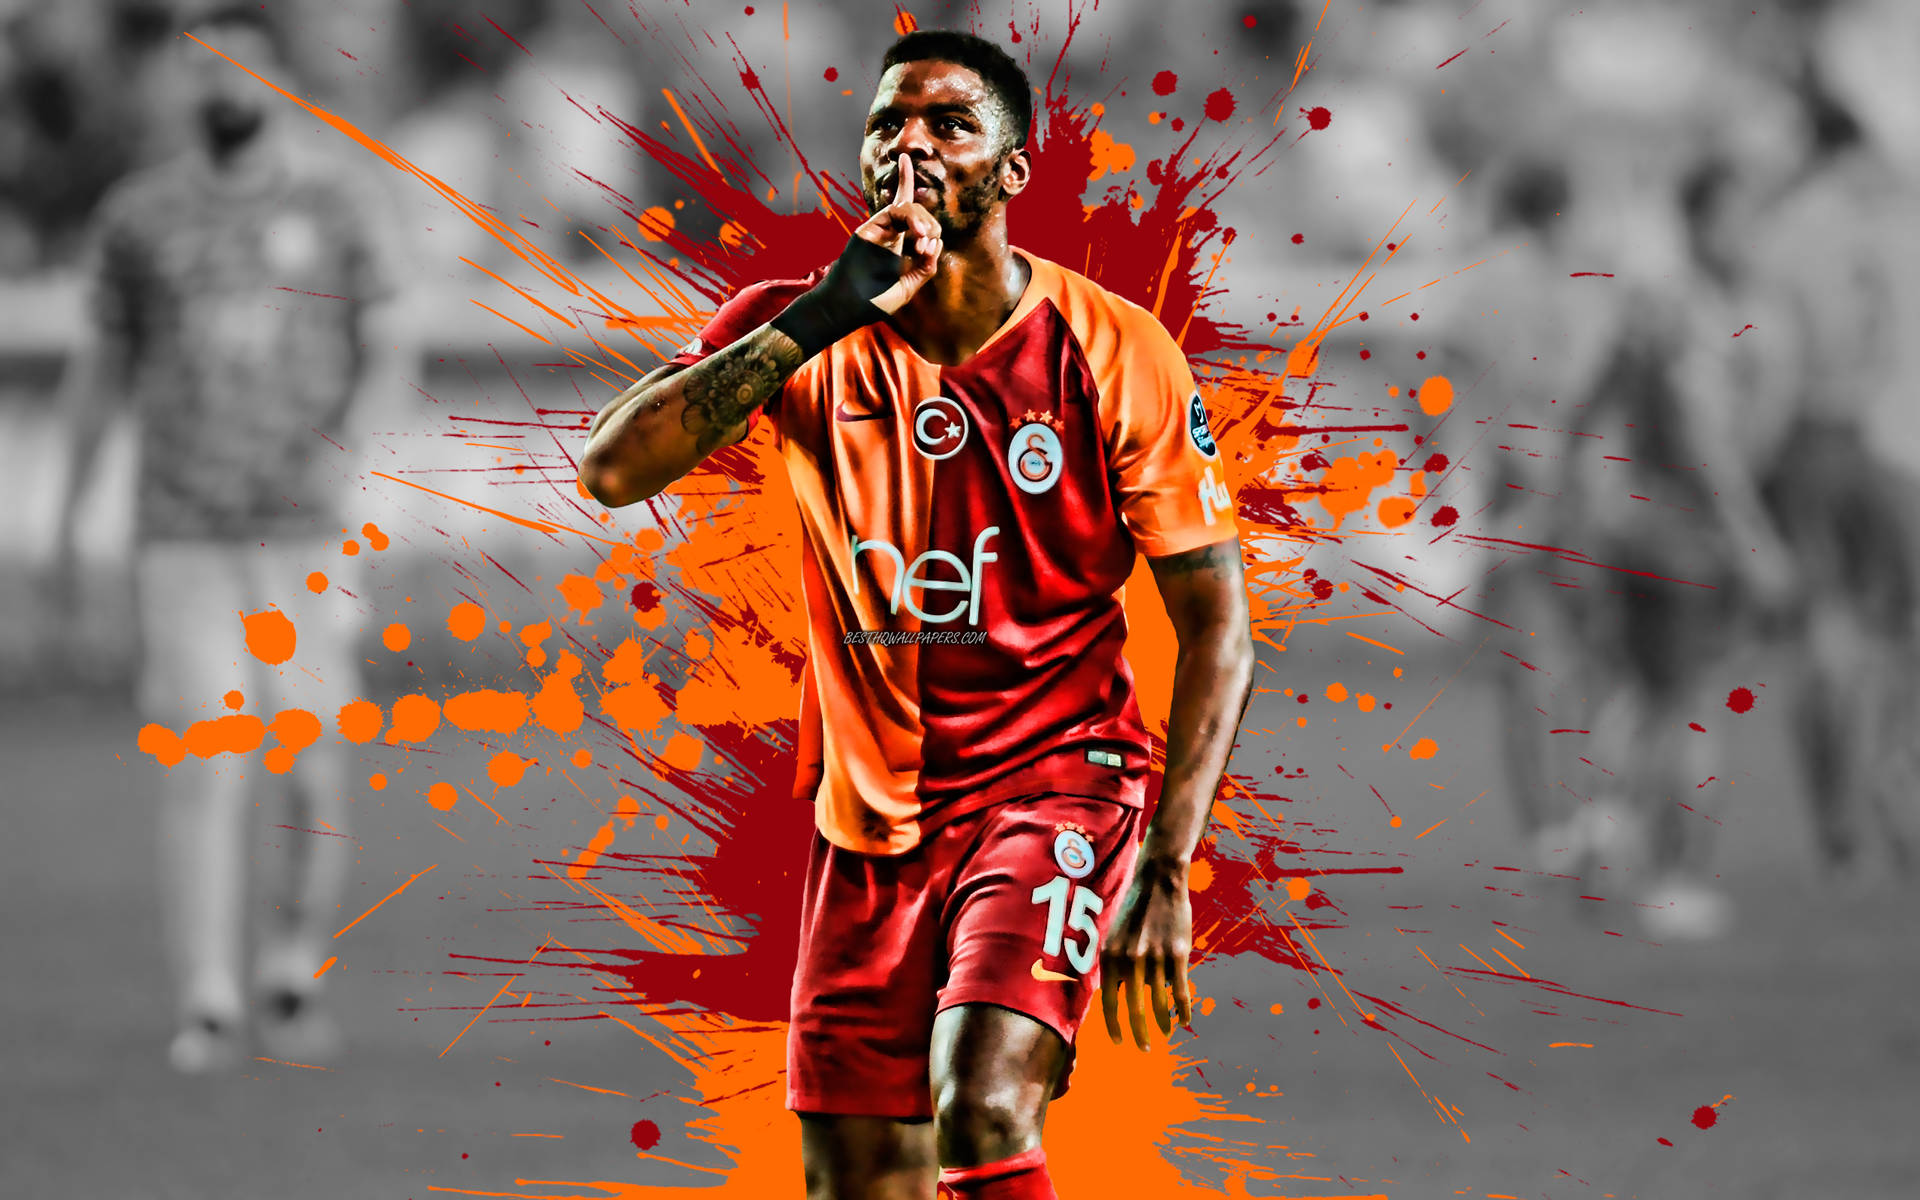 Galatasaray No. 15 Player in Action Wallpaper